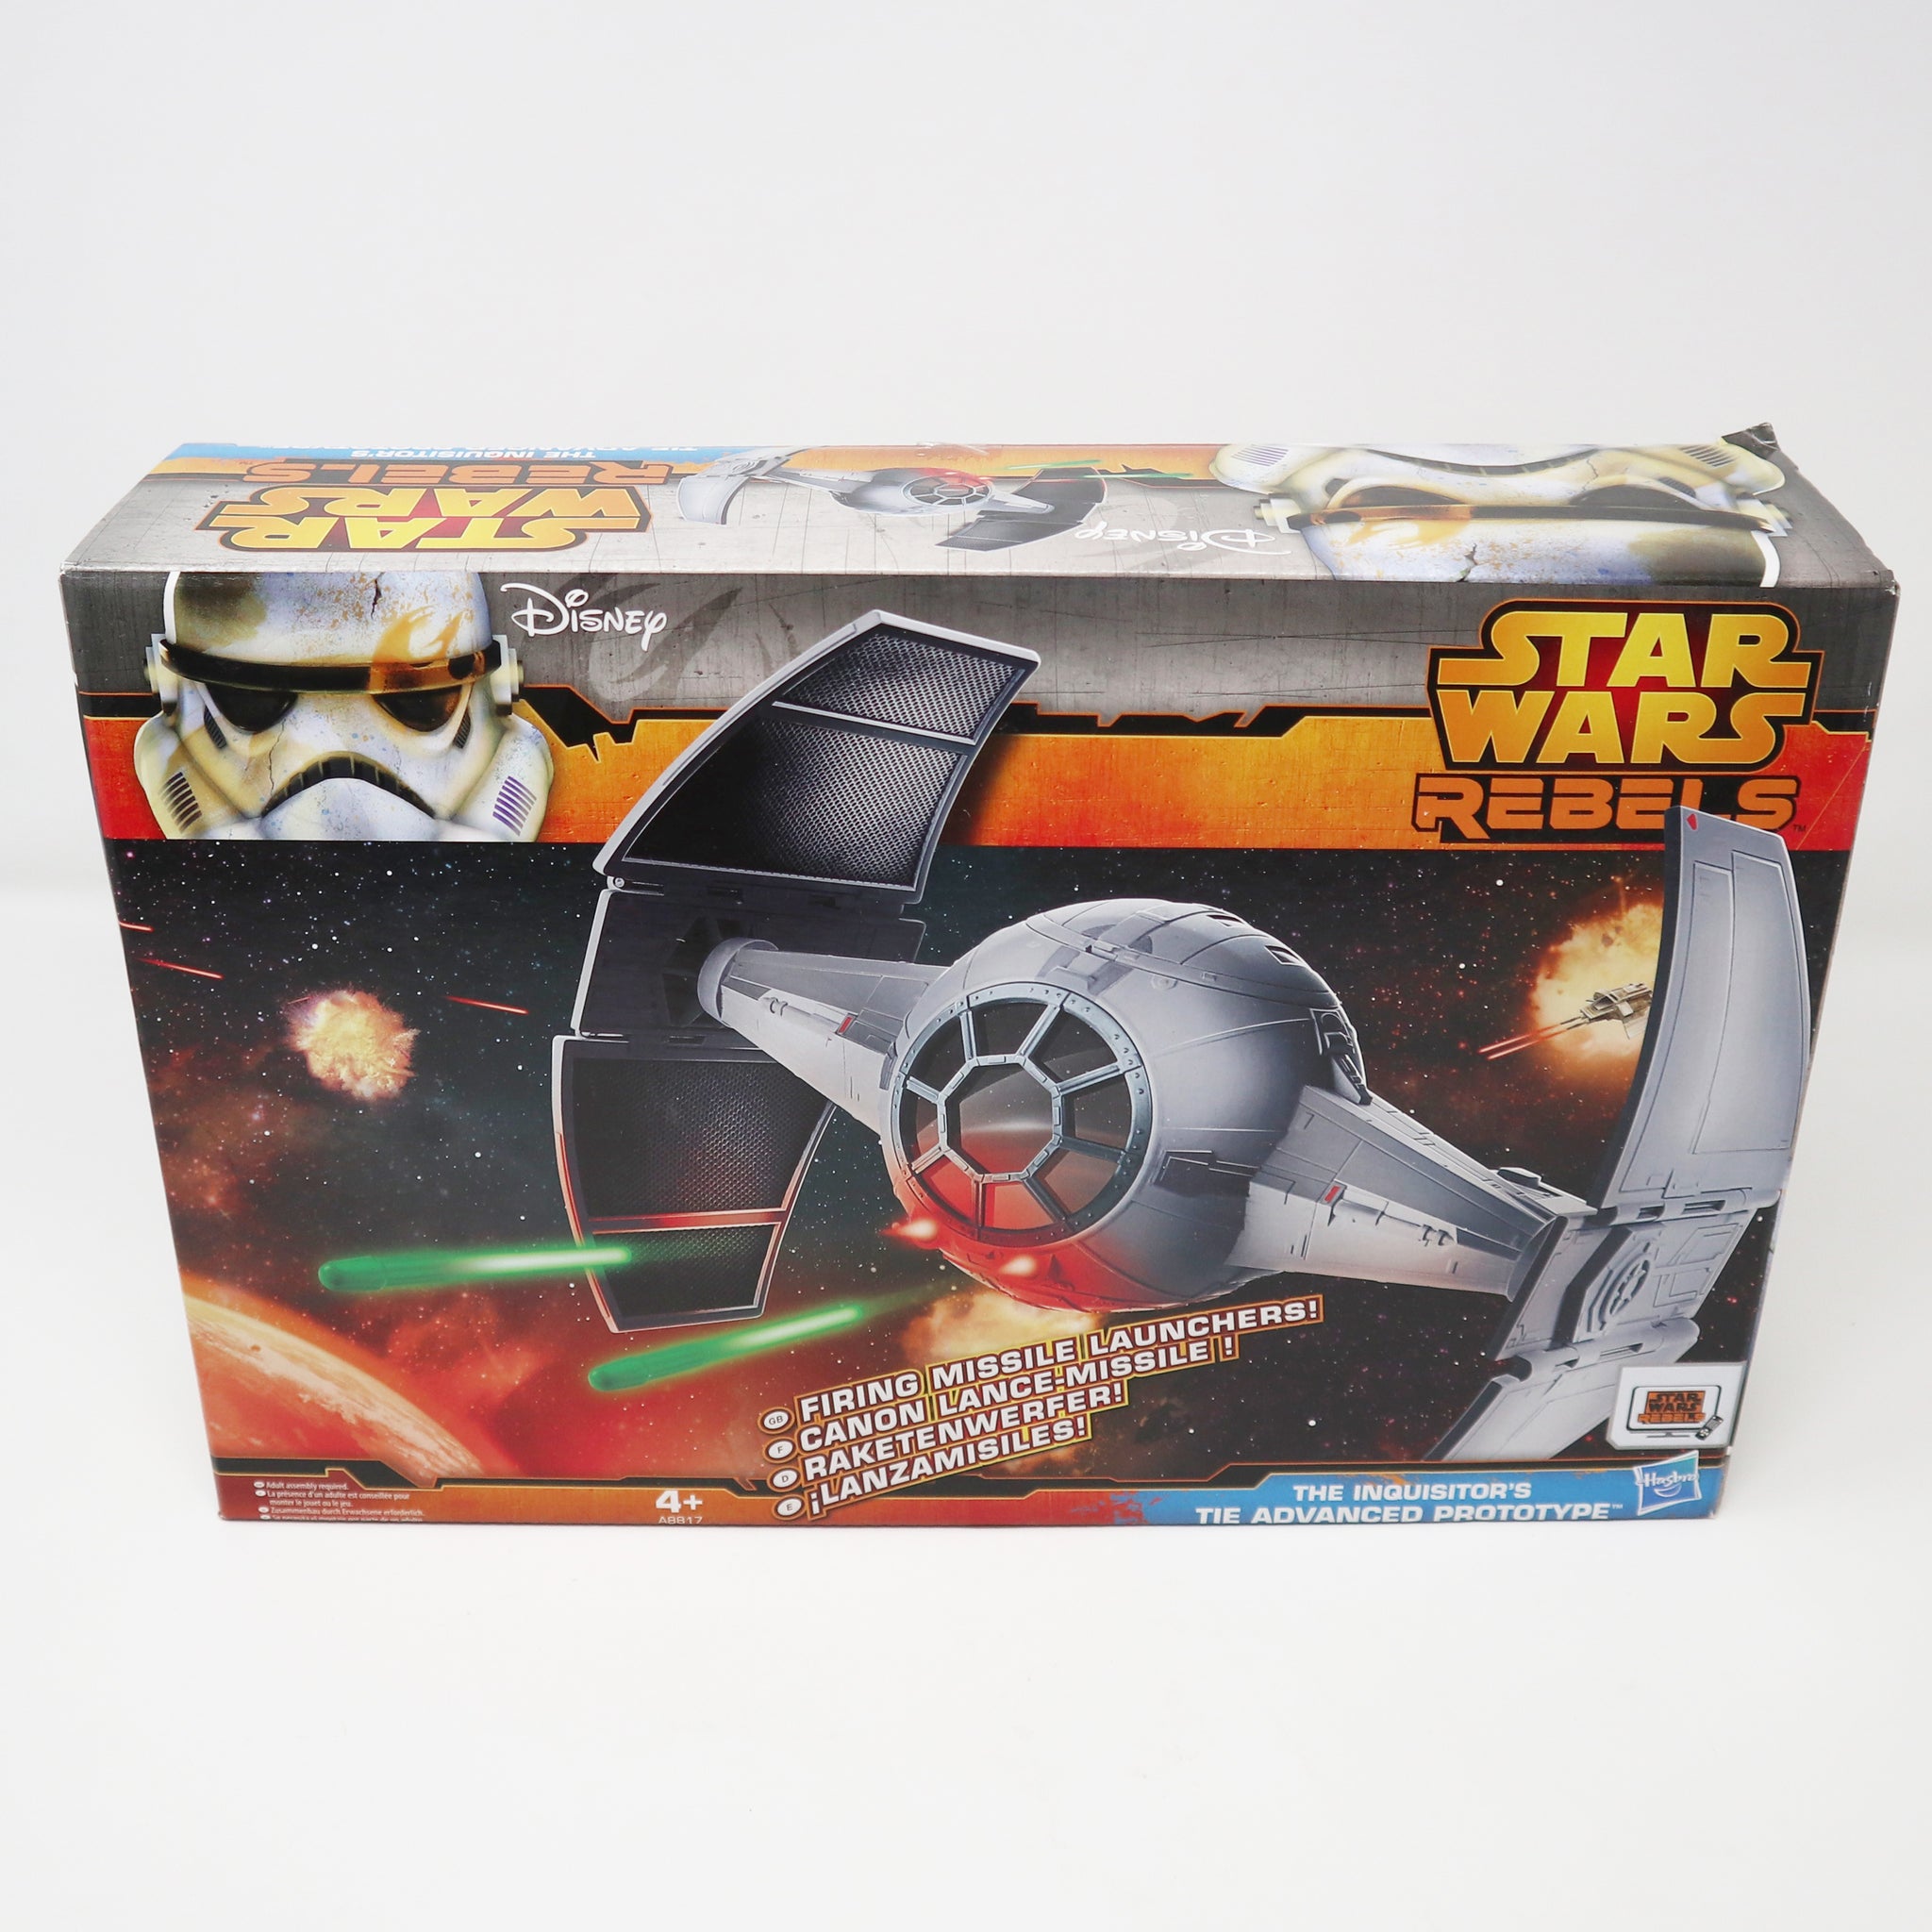 2014 Hasbro Disney Star Wars The Inquisitor's Tie Advanced Prototype Toy Vehicle Boxed Mint Sealed MISB